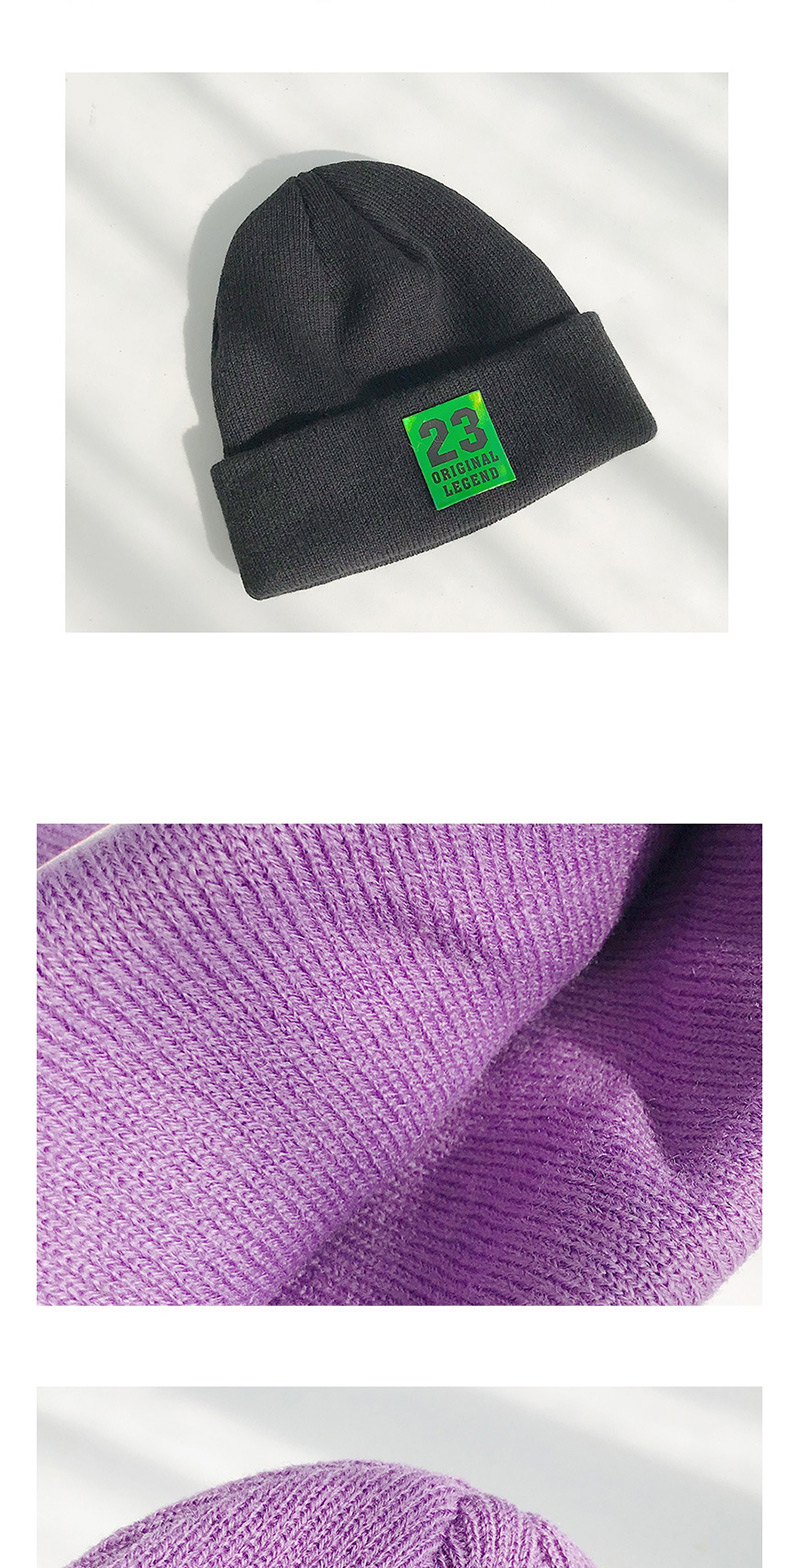 Fashion 23 Label Purple Pointed 23 Labeling Knitted Wool Cap,Knitting Wool Hats